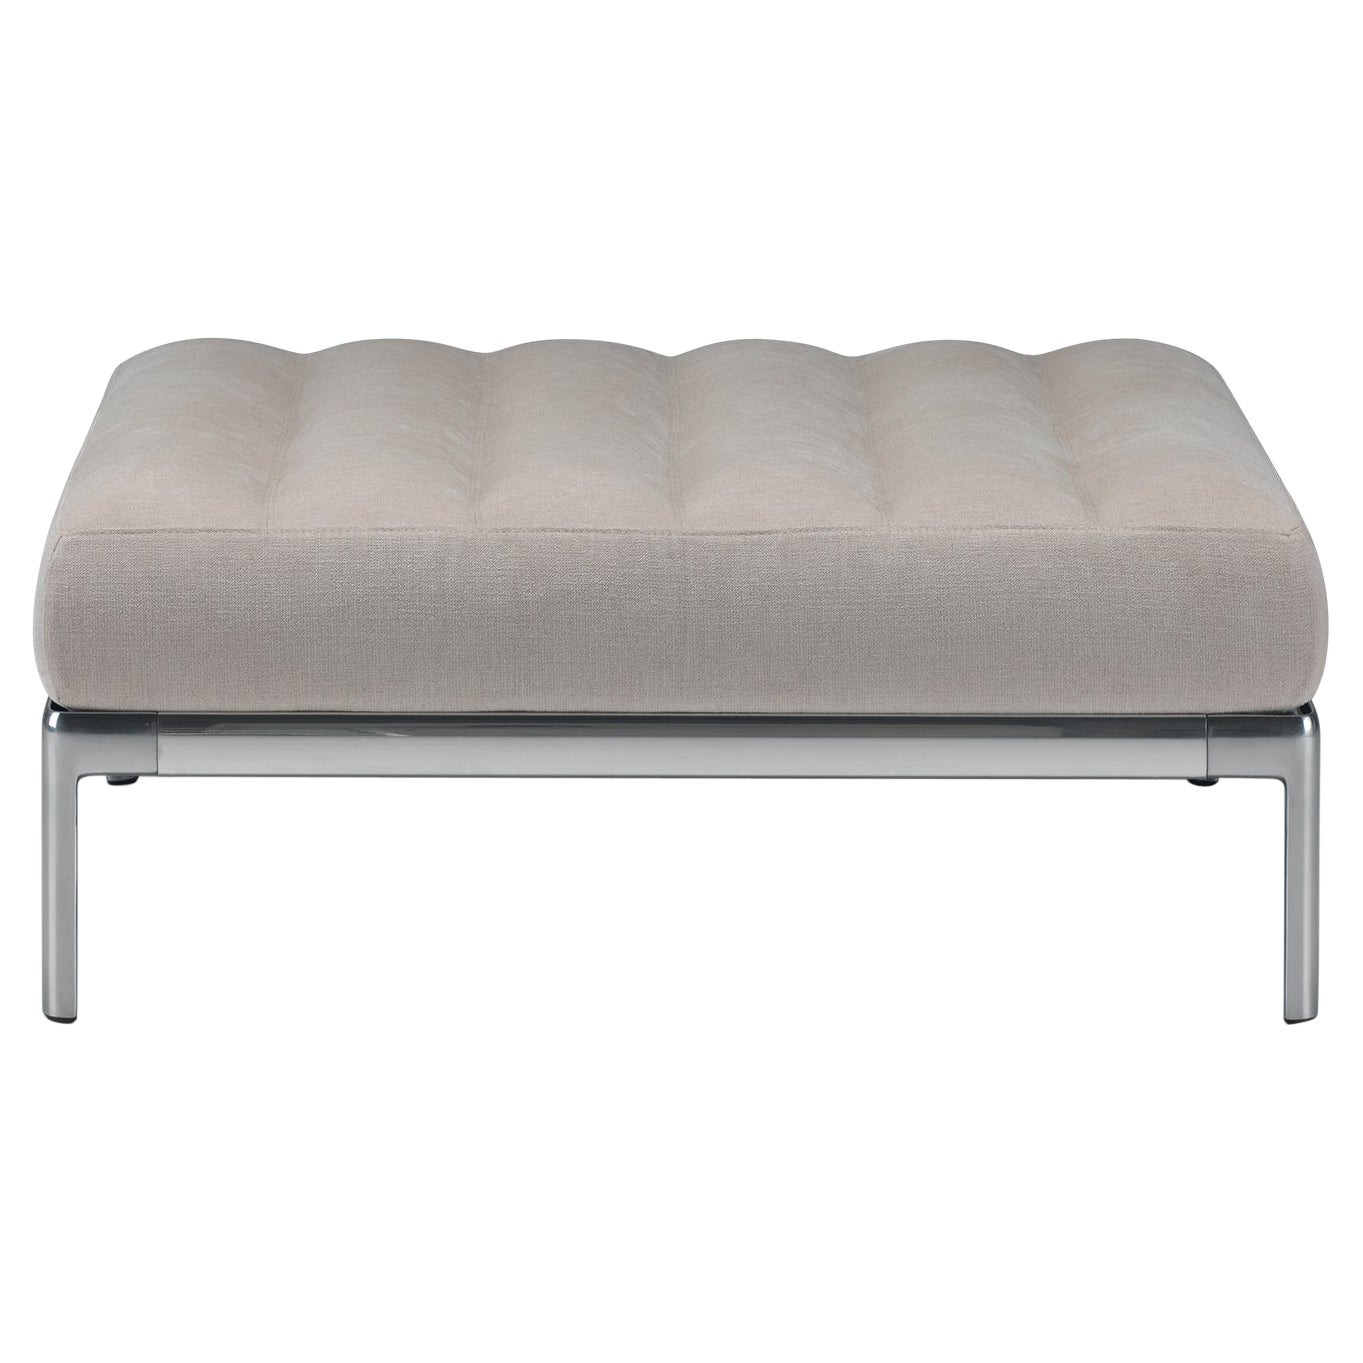 Alias P10 AluZen Pouf 80X95 A in Beige with Polished Aluminum Frame For Sale